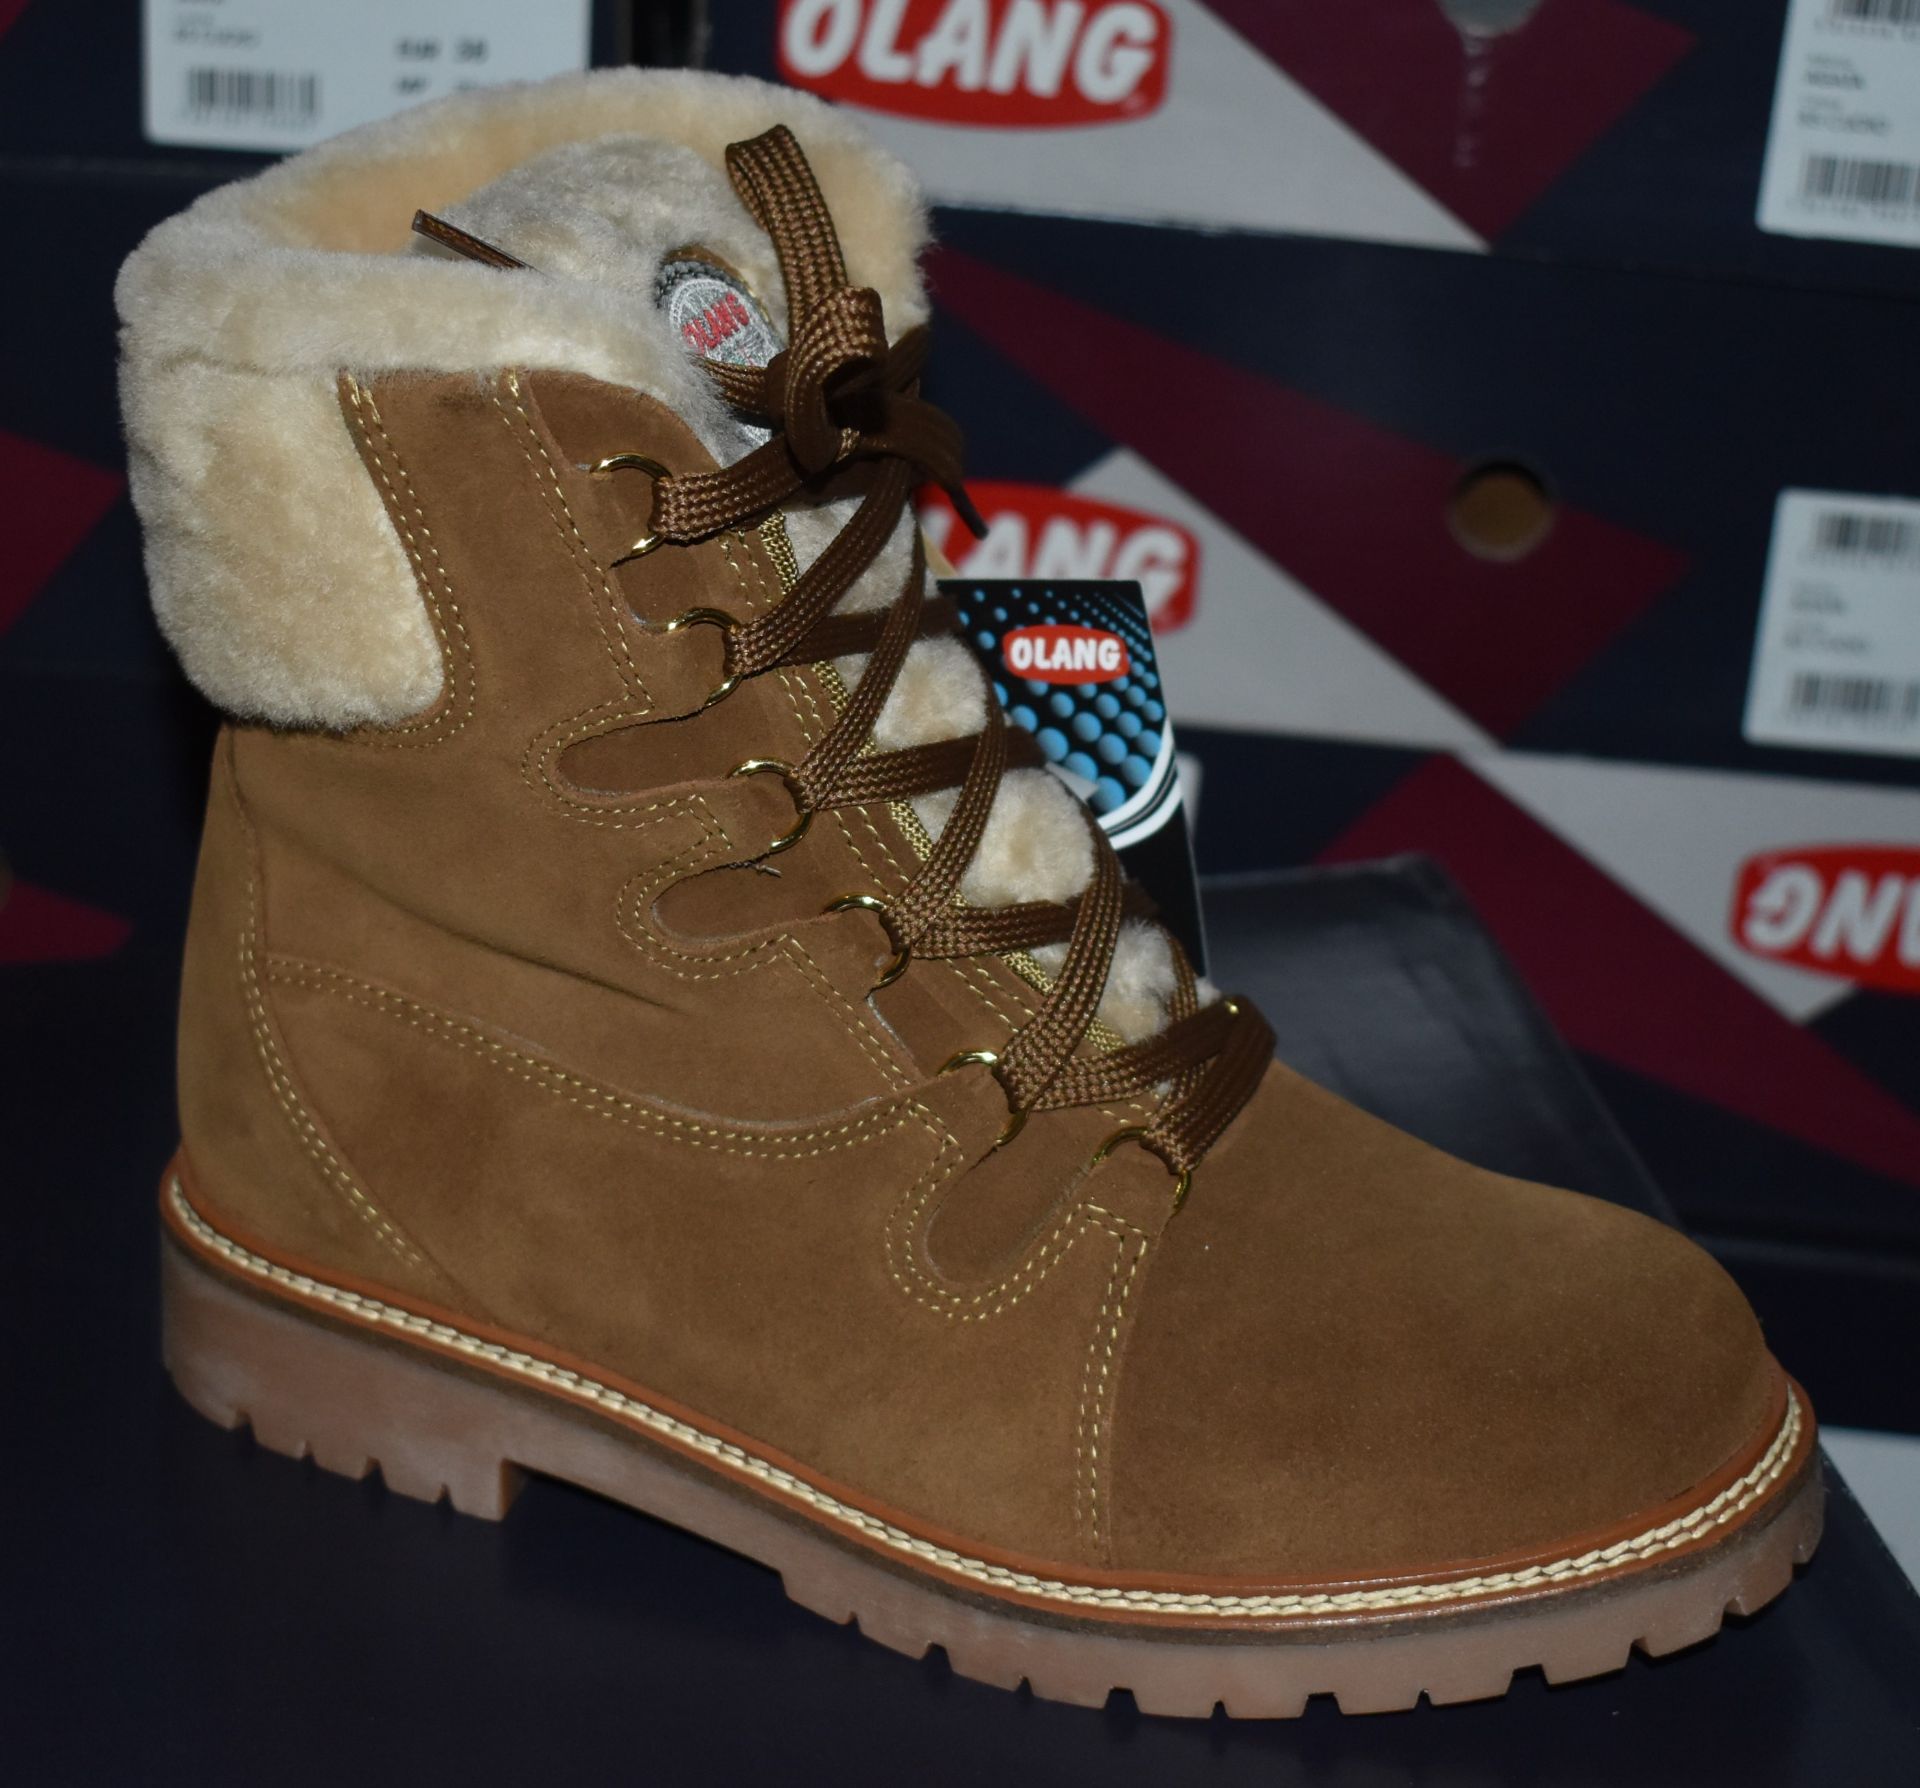 1 x Pair of Designer Olang Meribel 85 CUOIO Women's Winter Boots - Euro Size 39 - Brand New Boxed - Image 7 of 8